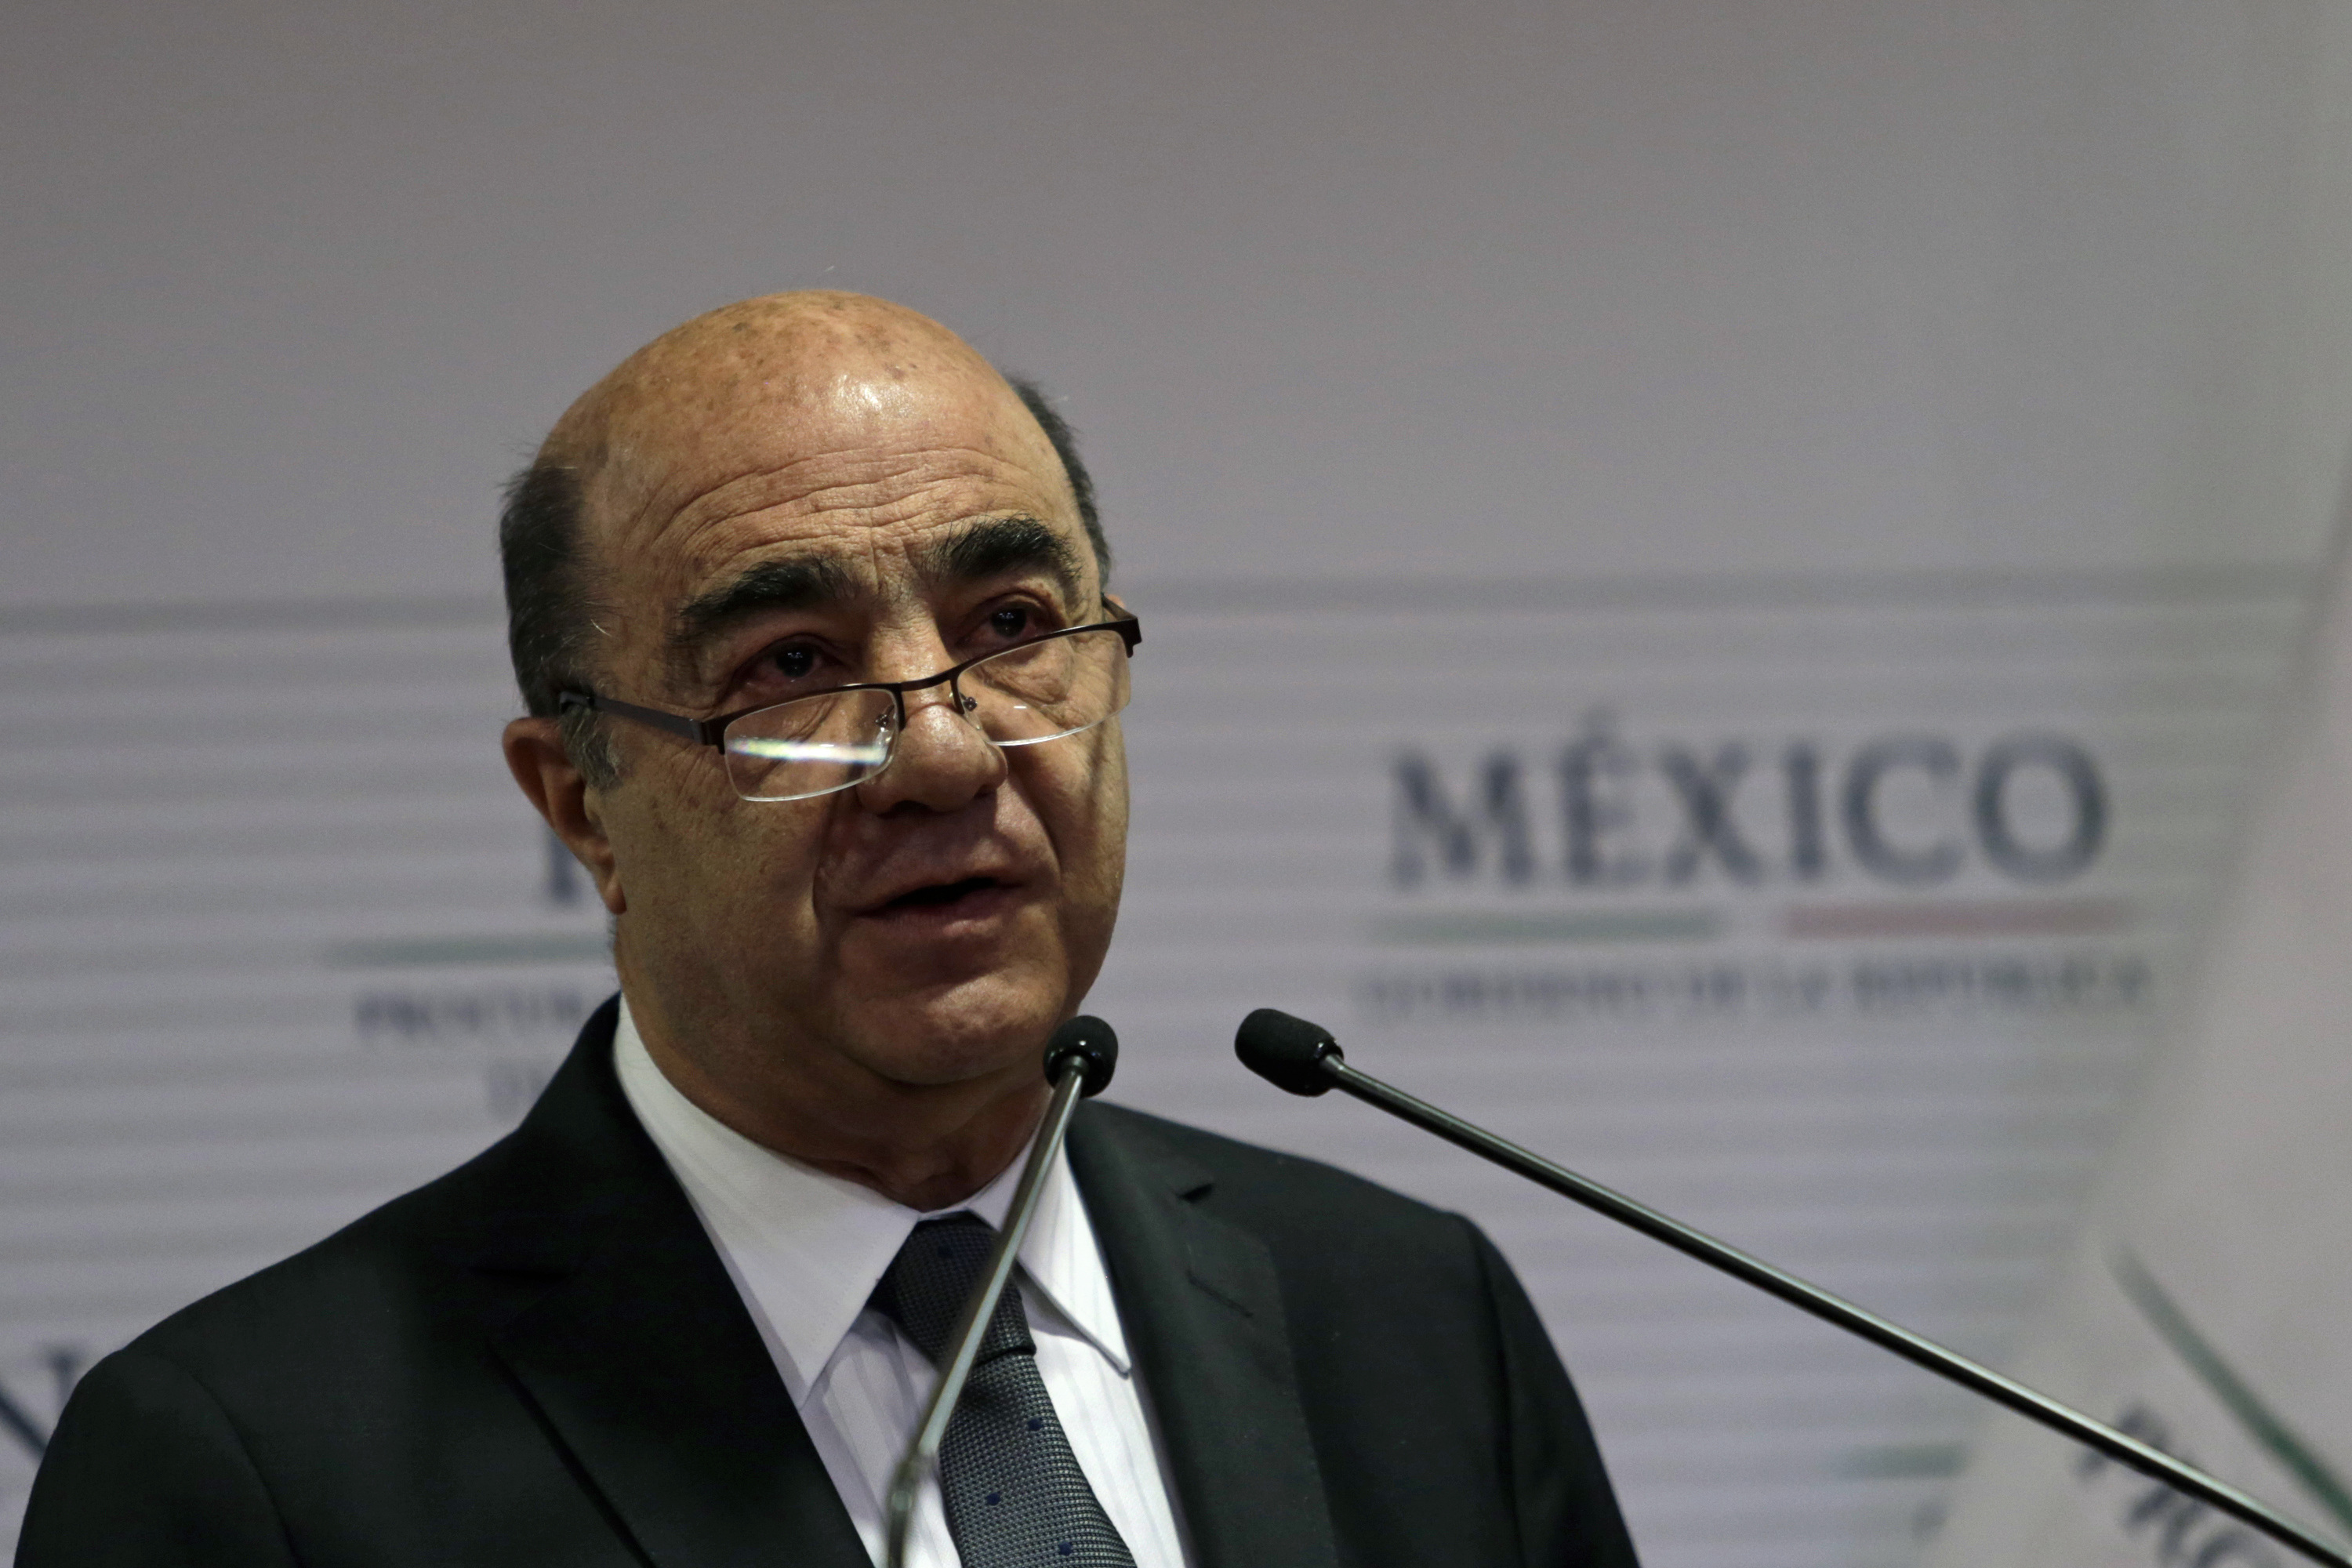 Attorney General Jesus Murillo speaks during a news conference at the attorney general's office in Mexico City